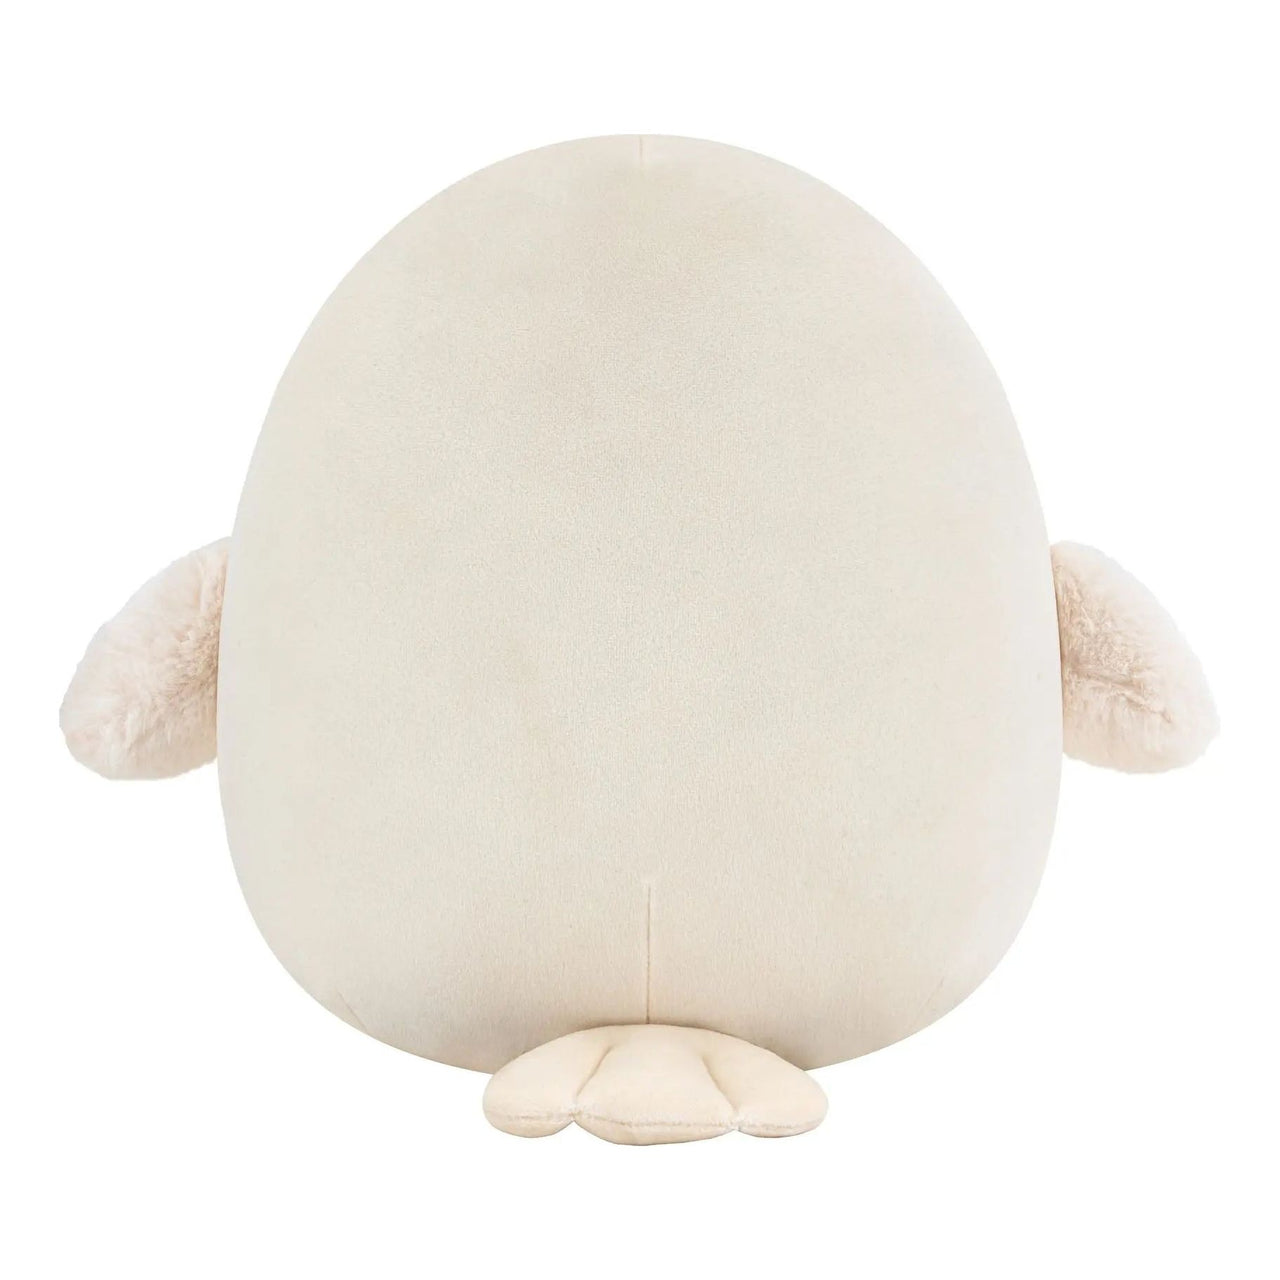 Squishmallows 8" Harry Potter - Hedwig Plush Squishmallows